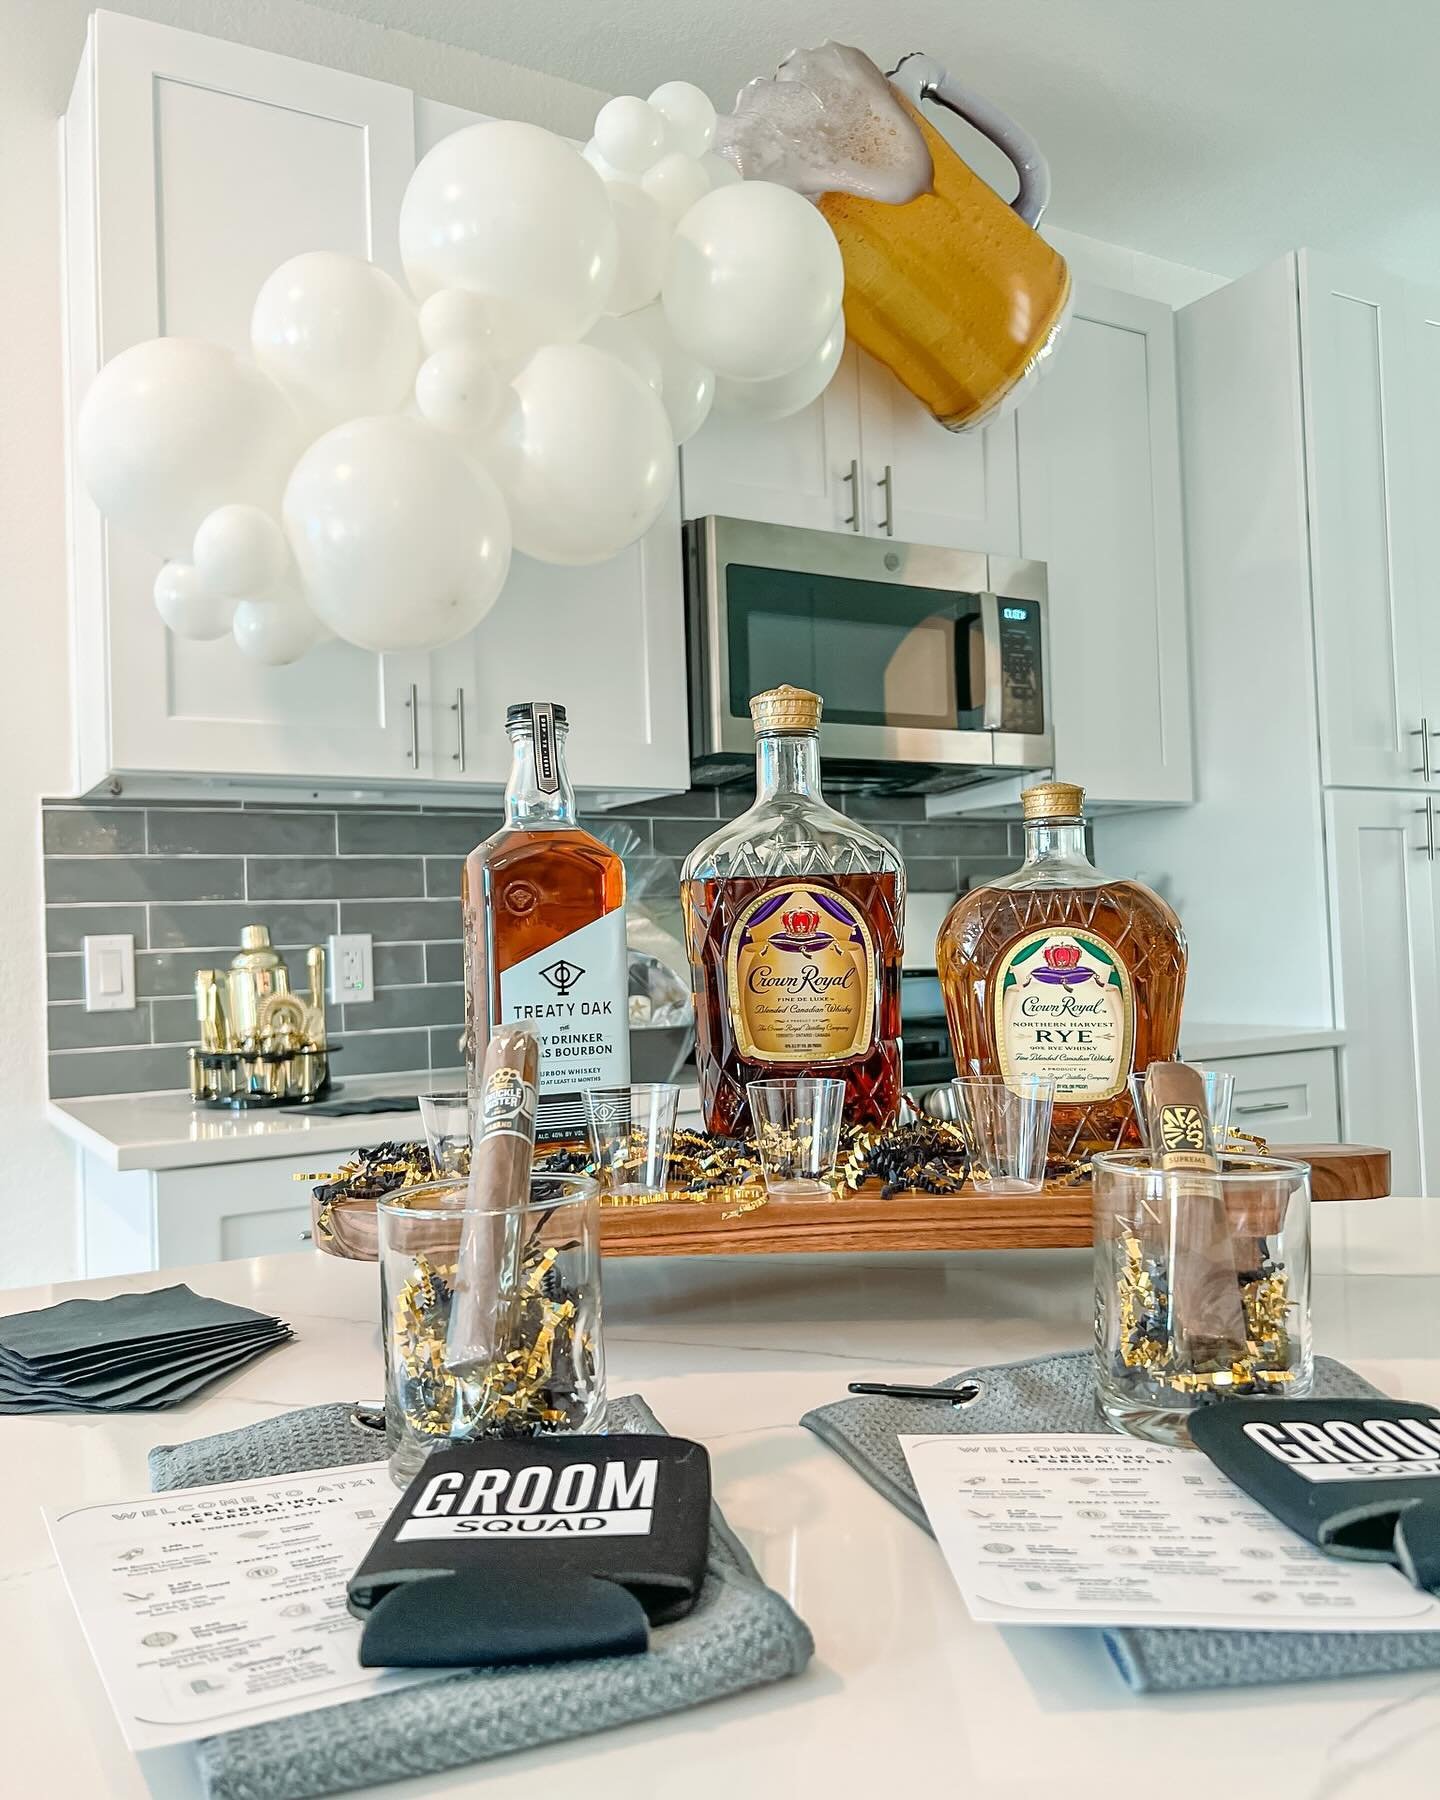 Don&rsquo;t forget, we also do bachelor party set-ups! 🎉 Guys deserve amazing celebrations too! This is the perfect surprise for your fianc&eacute; and his crew! 🤵🏻&zwj;♂️🍺🏓 #bachelor #party #setup #thebachplan #whiskey